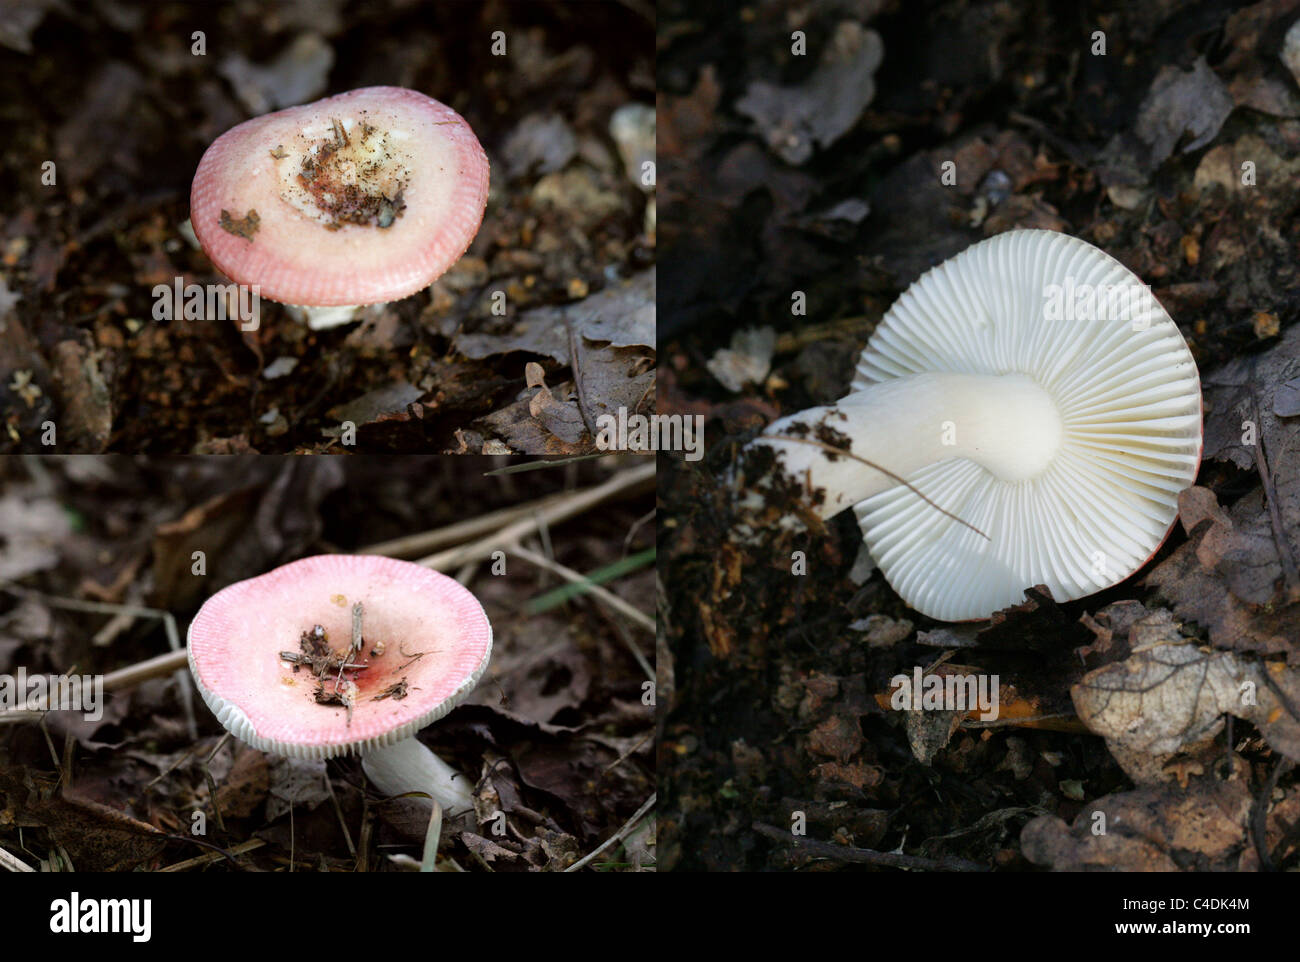 Birch Brittlegill Fungus, Russula betularum, Russulaceae. Growing in Woodland with Birch Trees. September. Composite of 3 Images Stock Photo